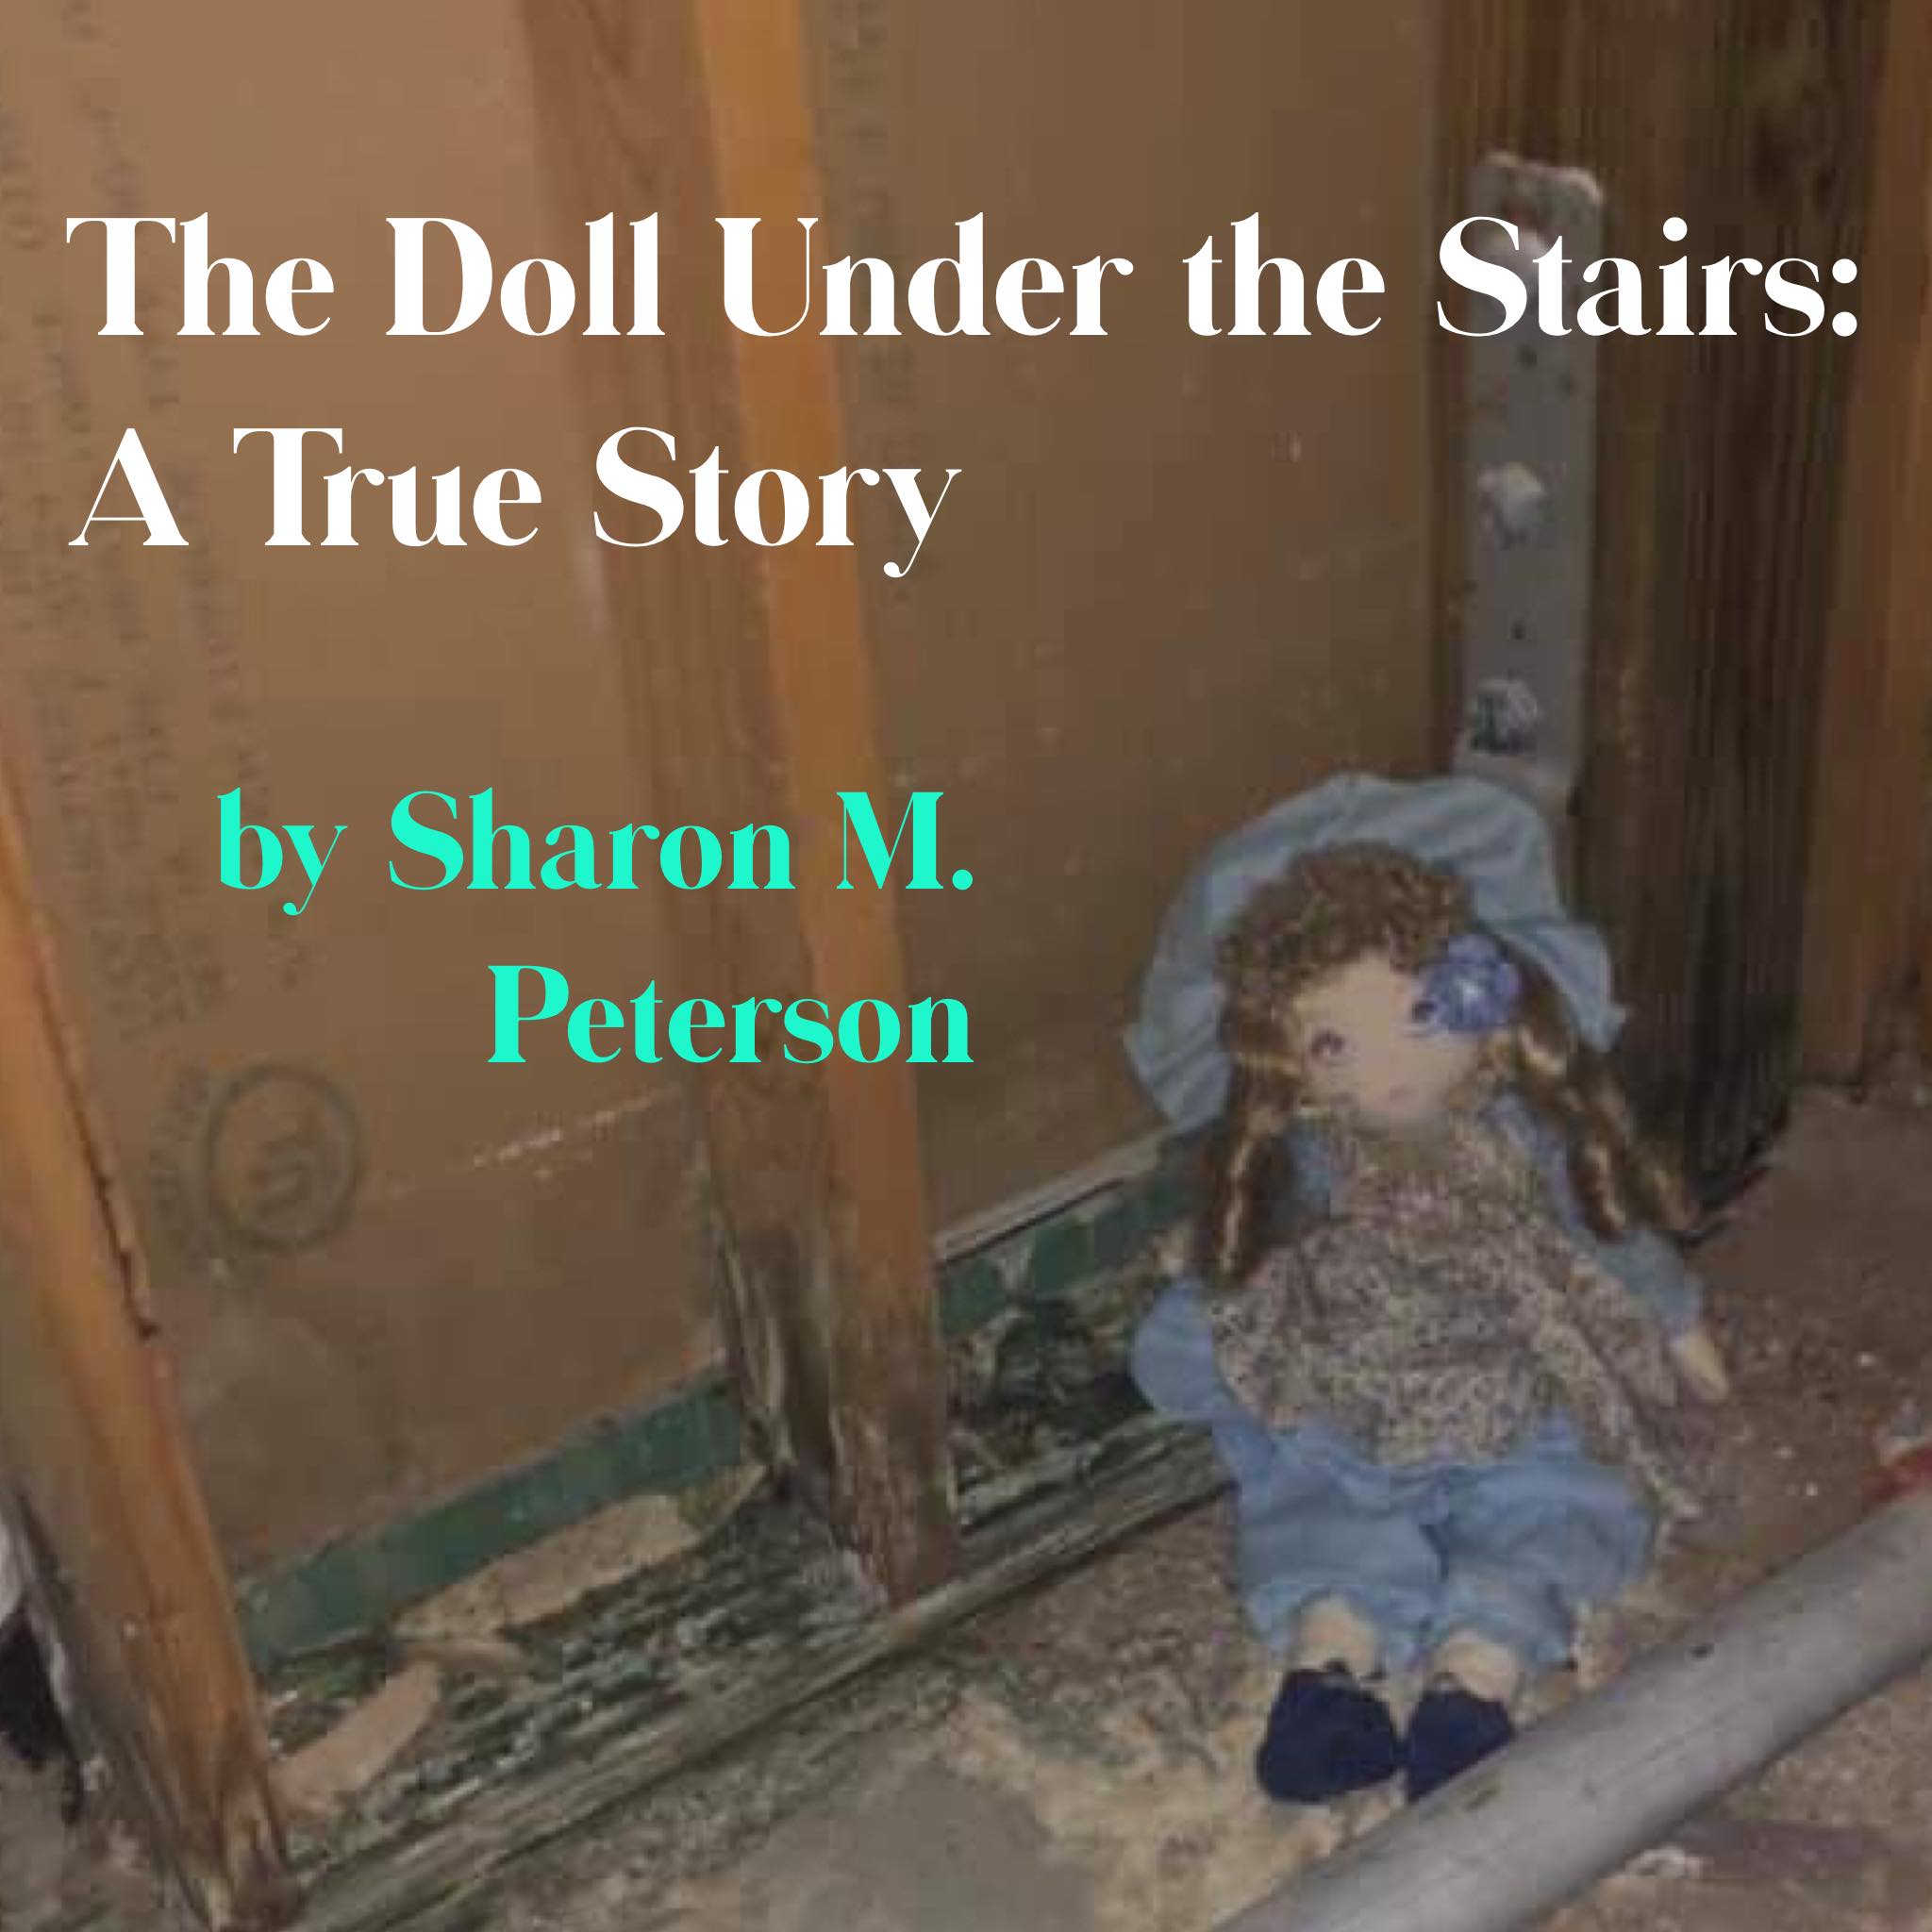 The Doll Under the Stairs: A True Story